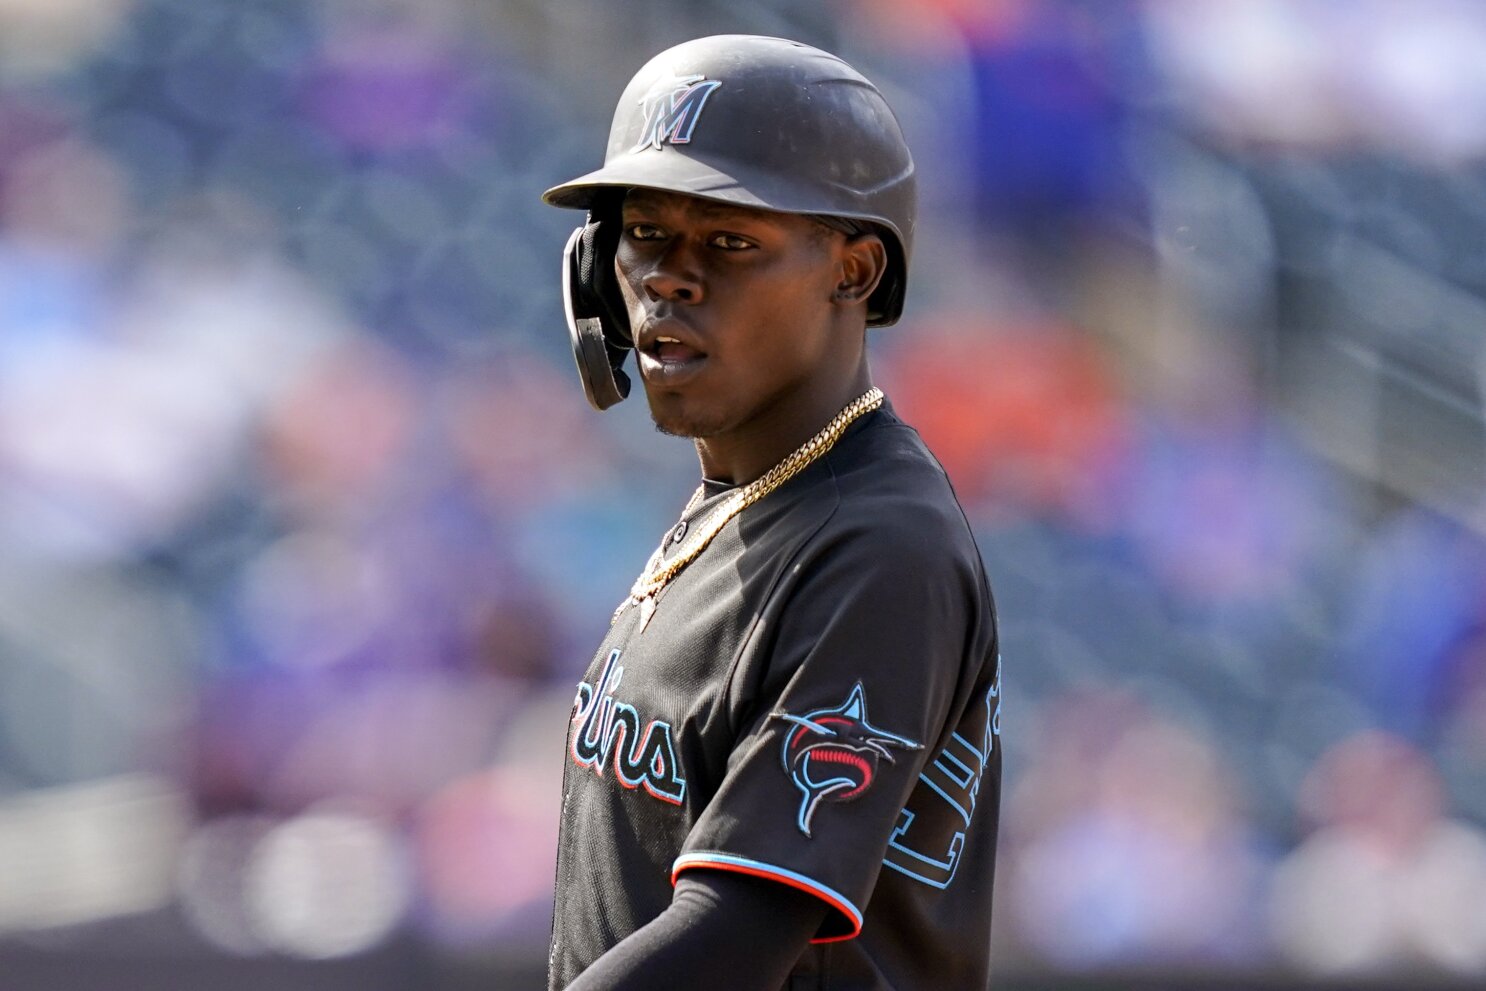 Anderson homers, Marlins hold off A's 5-3